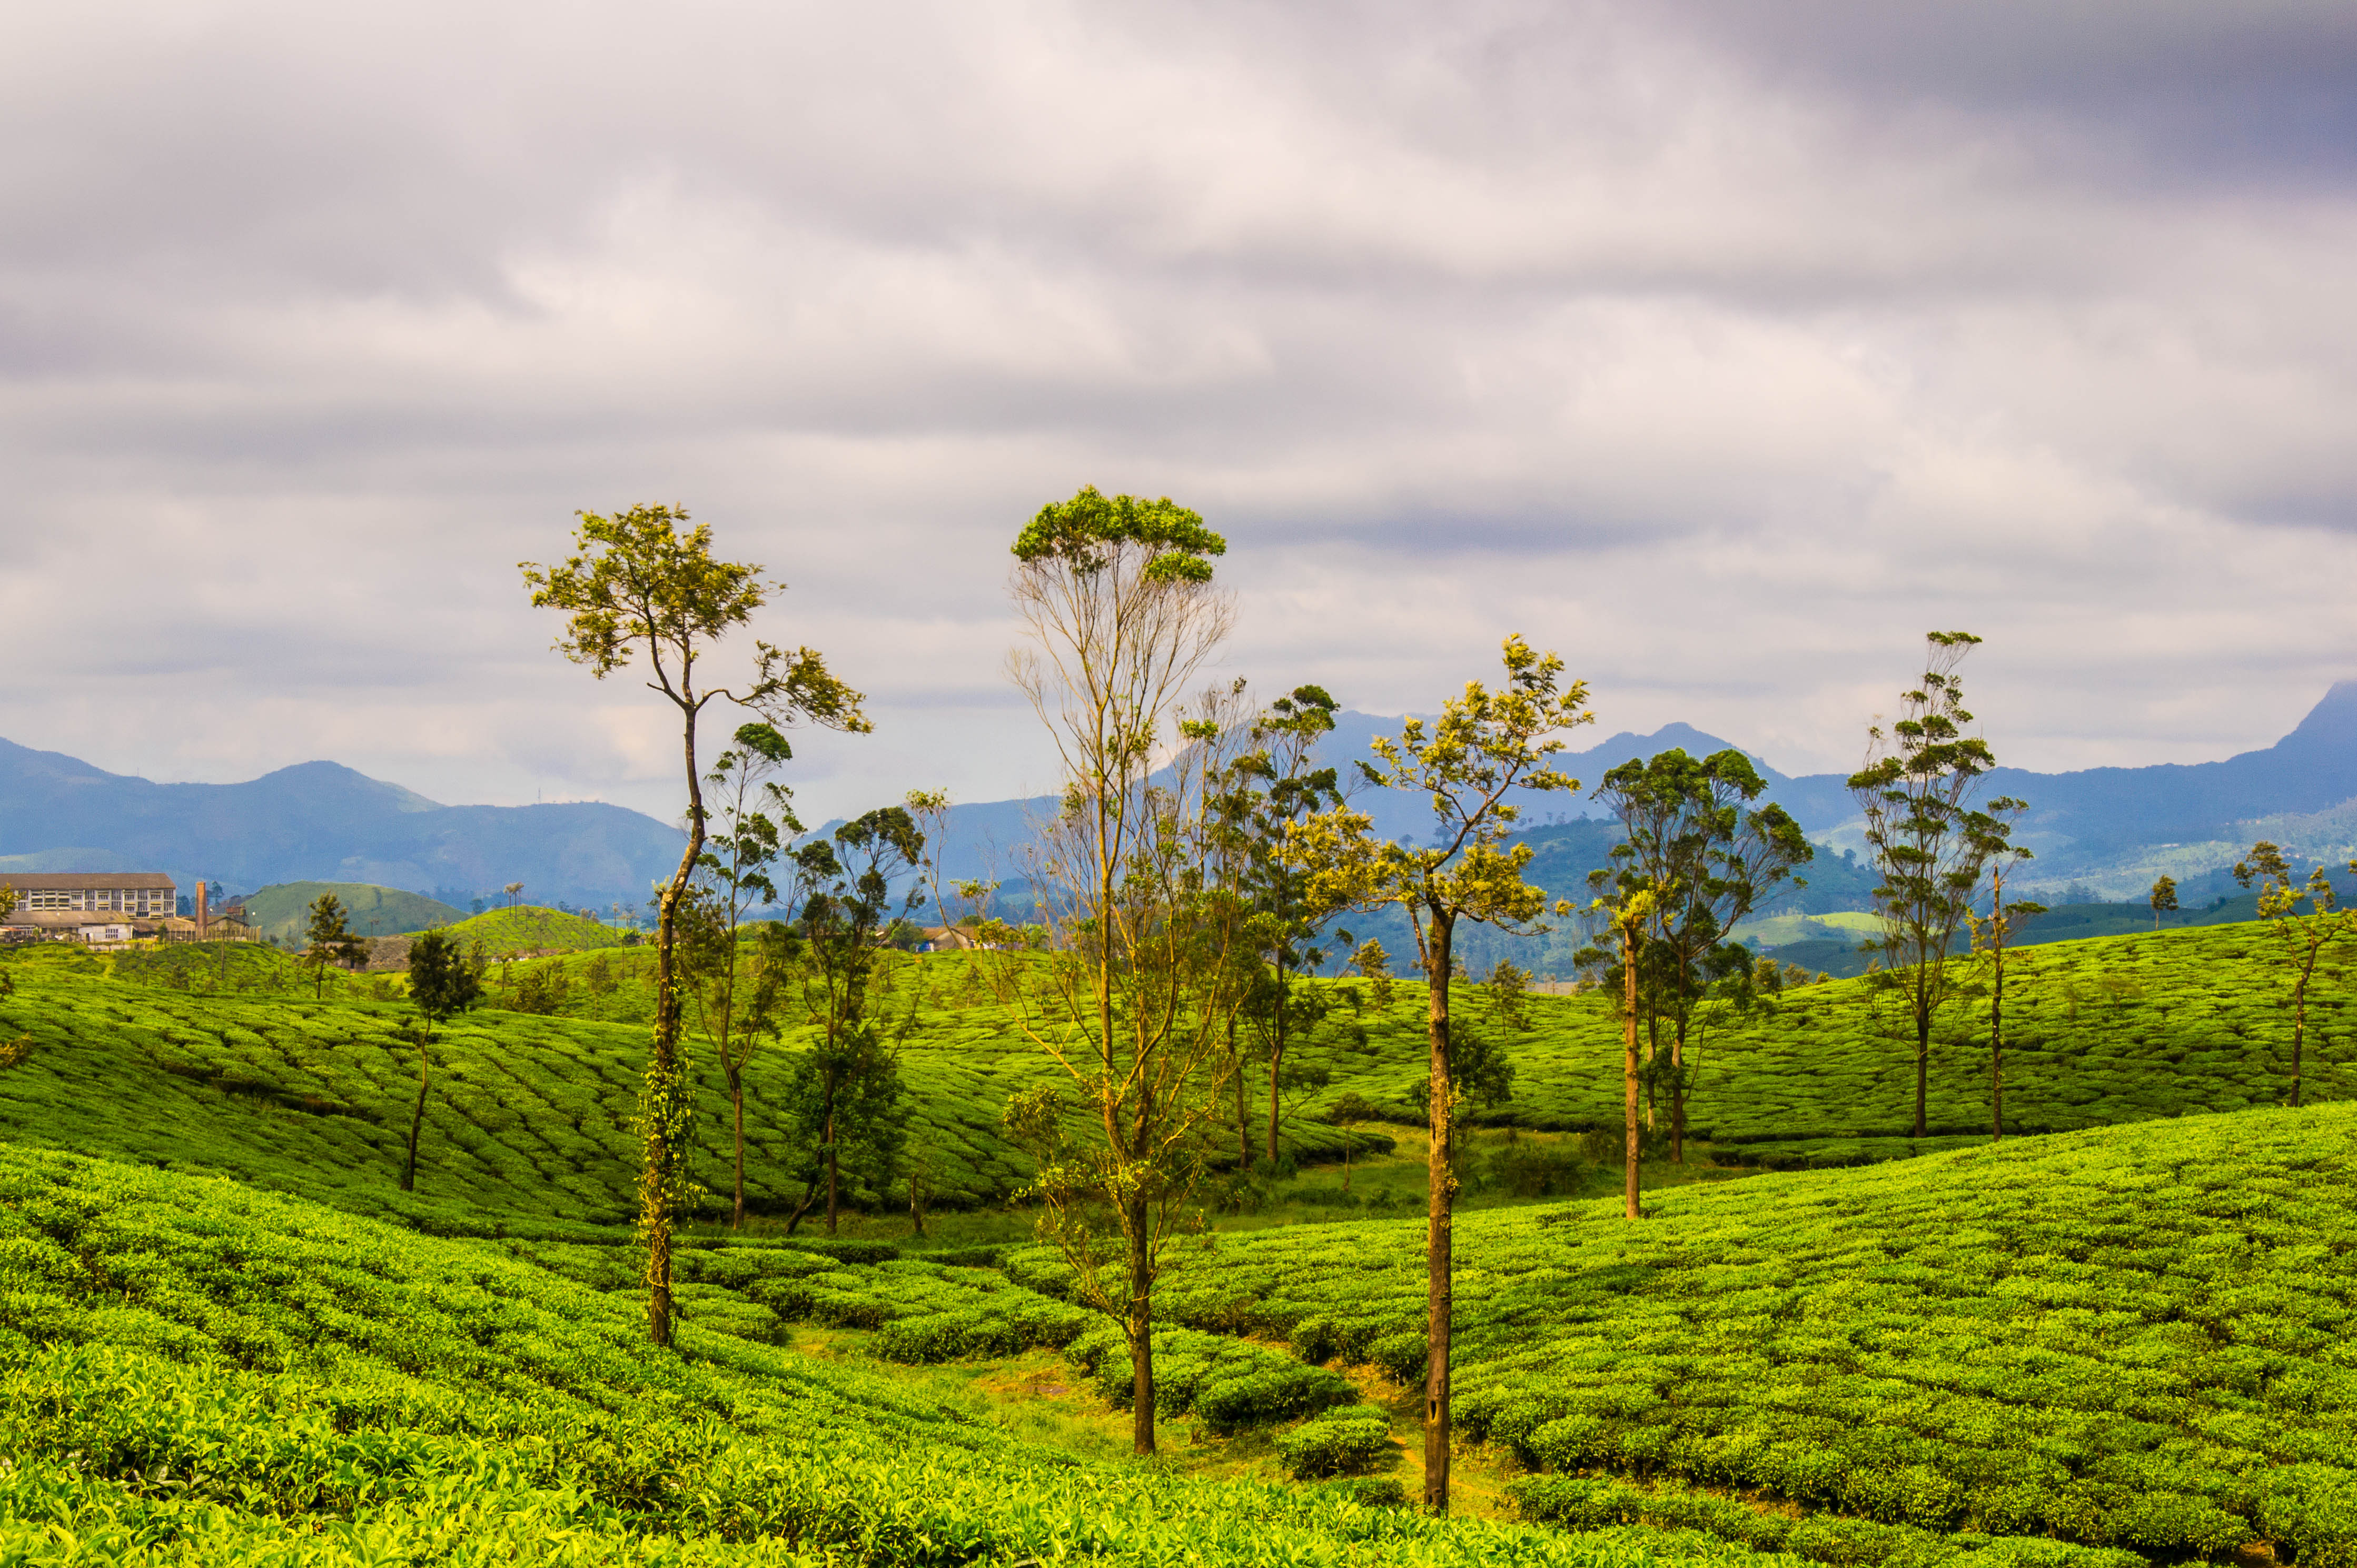 Beautiful image of tea plantations in Valparai sprinkled by big trees in between the tea plants